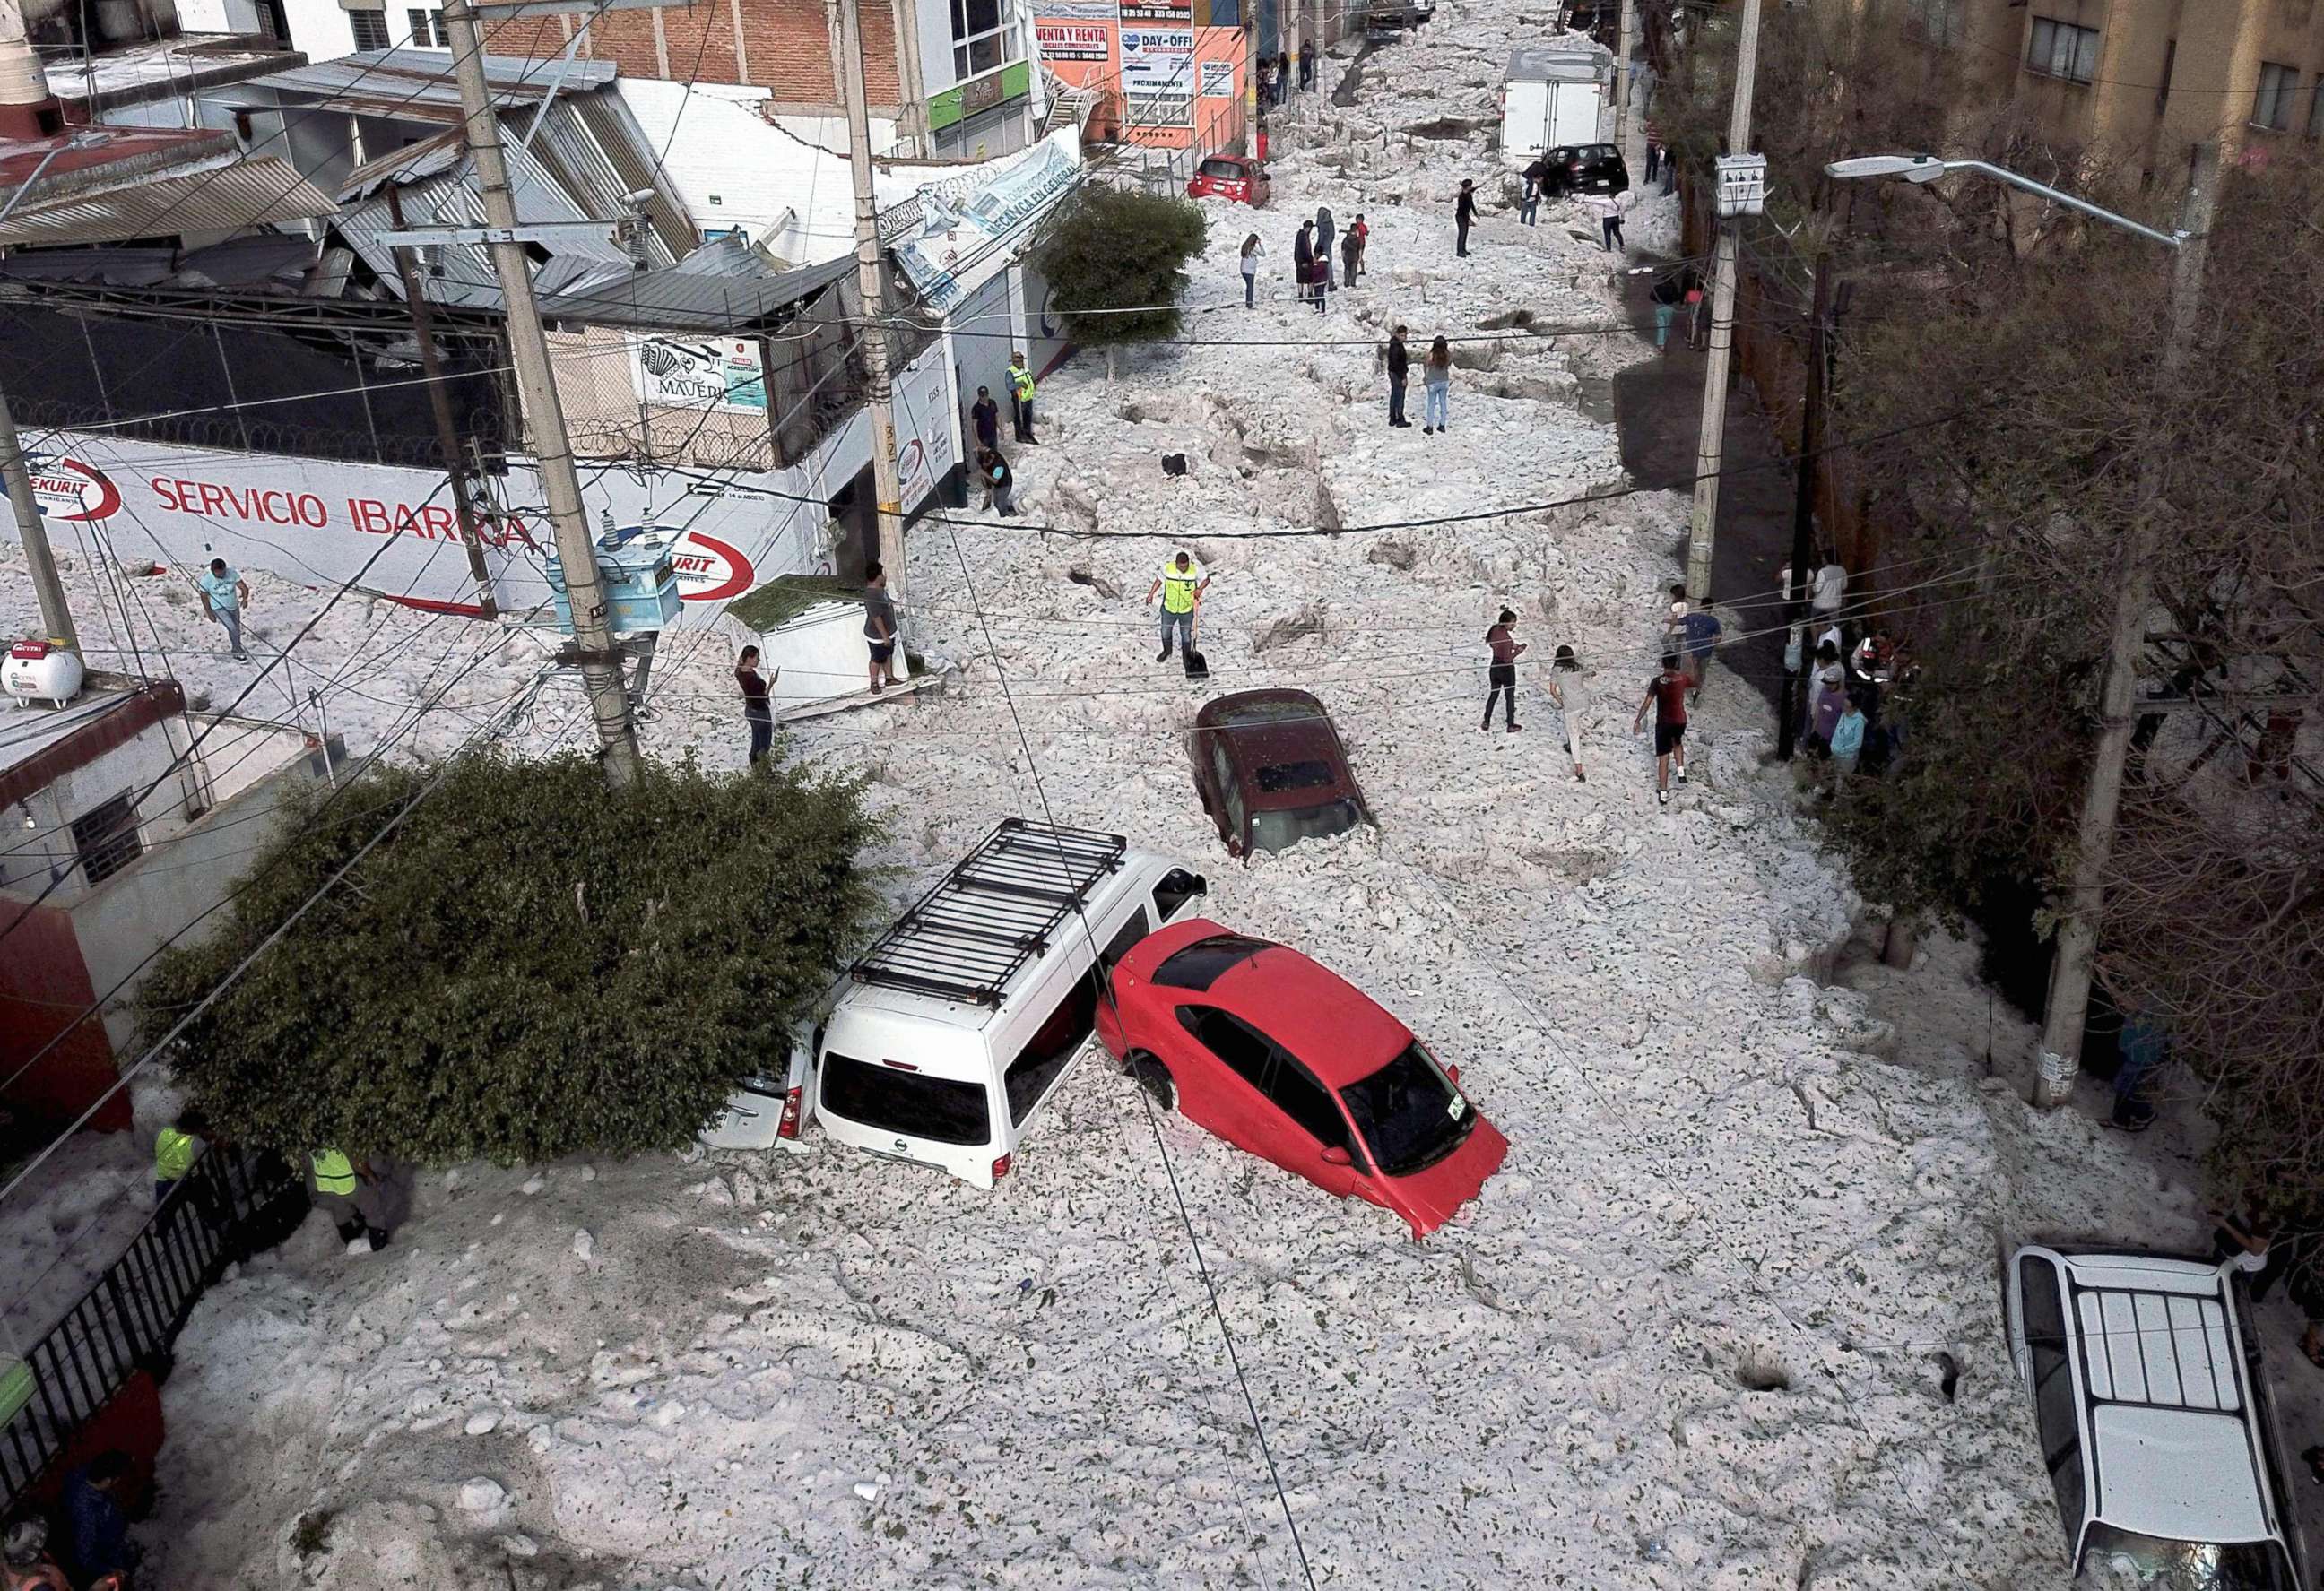 PHOTO: Vehicles are buried in hail in the streets in the eastern area of Guadalajara, Jalisco state, Mexico, June 30, 2019.